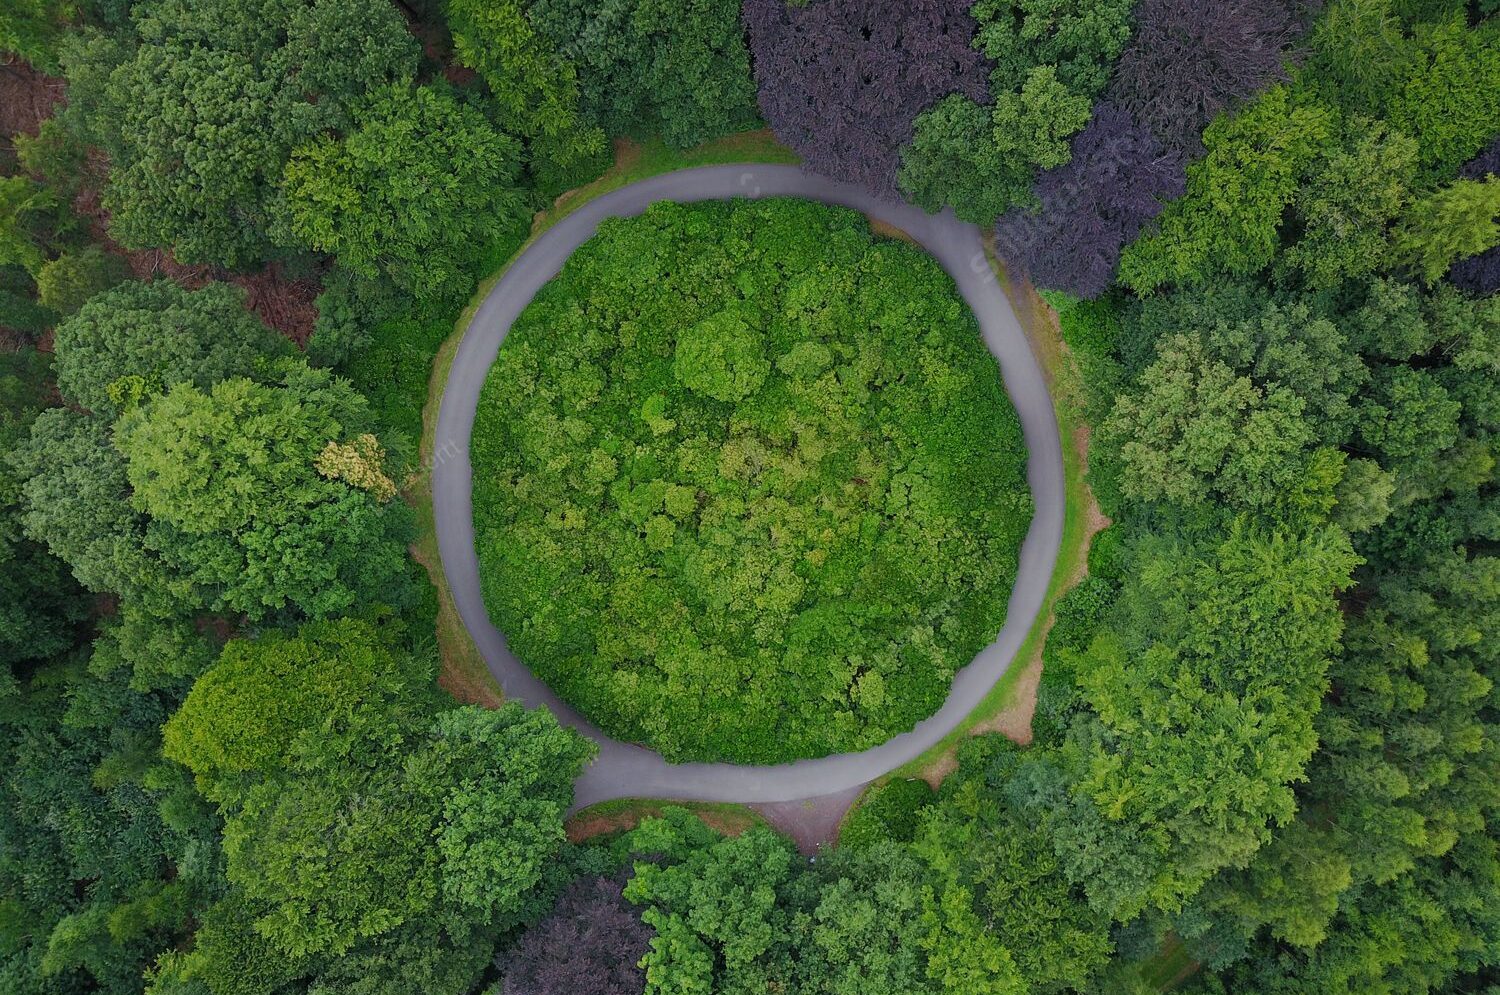 stock-photo-roundabout-in-the-middle-of-a-forest-in-belgium-circular-road-surrounded-by-trees-1614438151